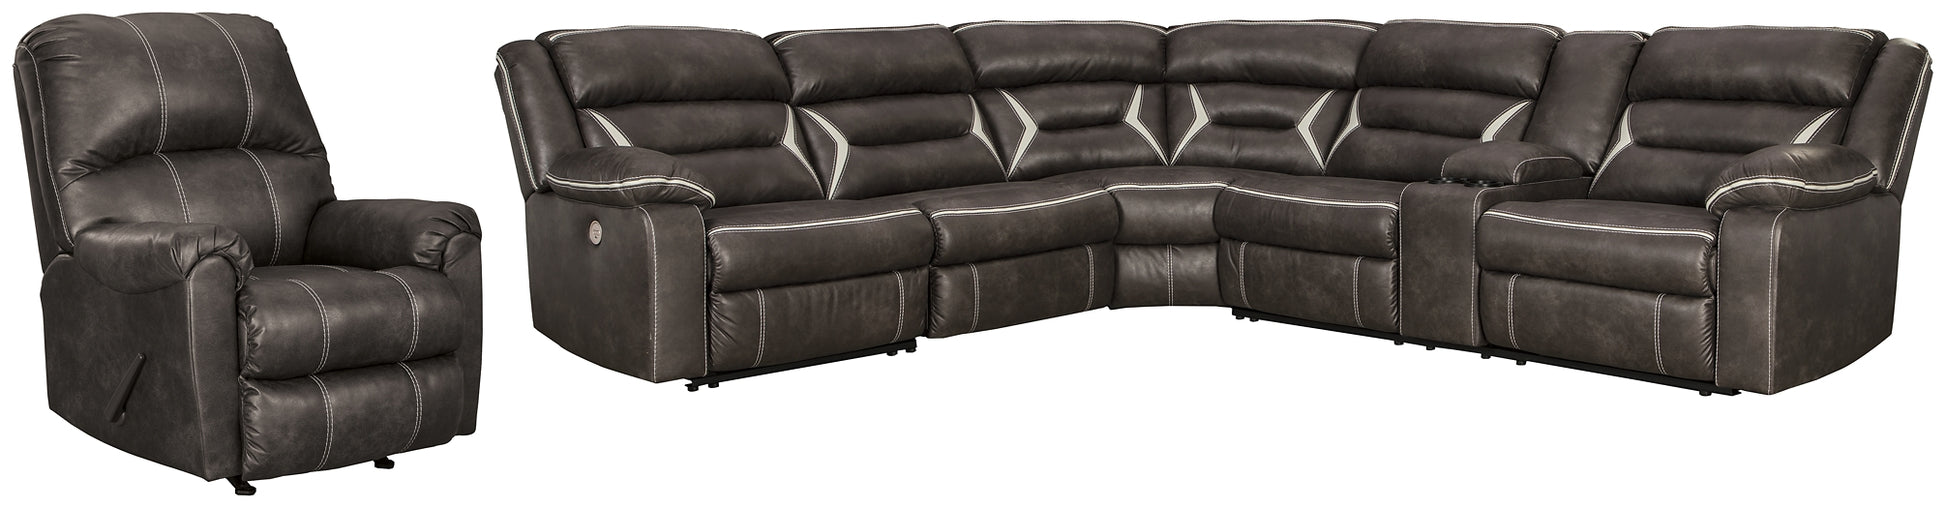 Kincord 4-Piece Sectional with Recliner JB's Furniture  Home Furniture, Home Decor, Furniture Store